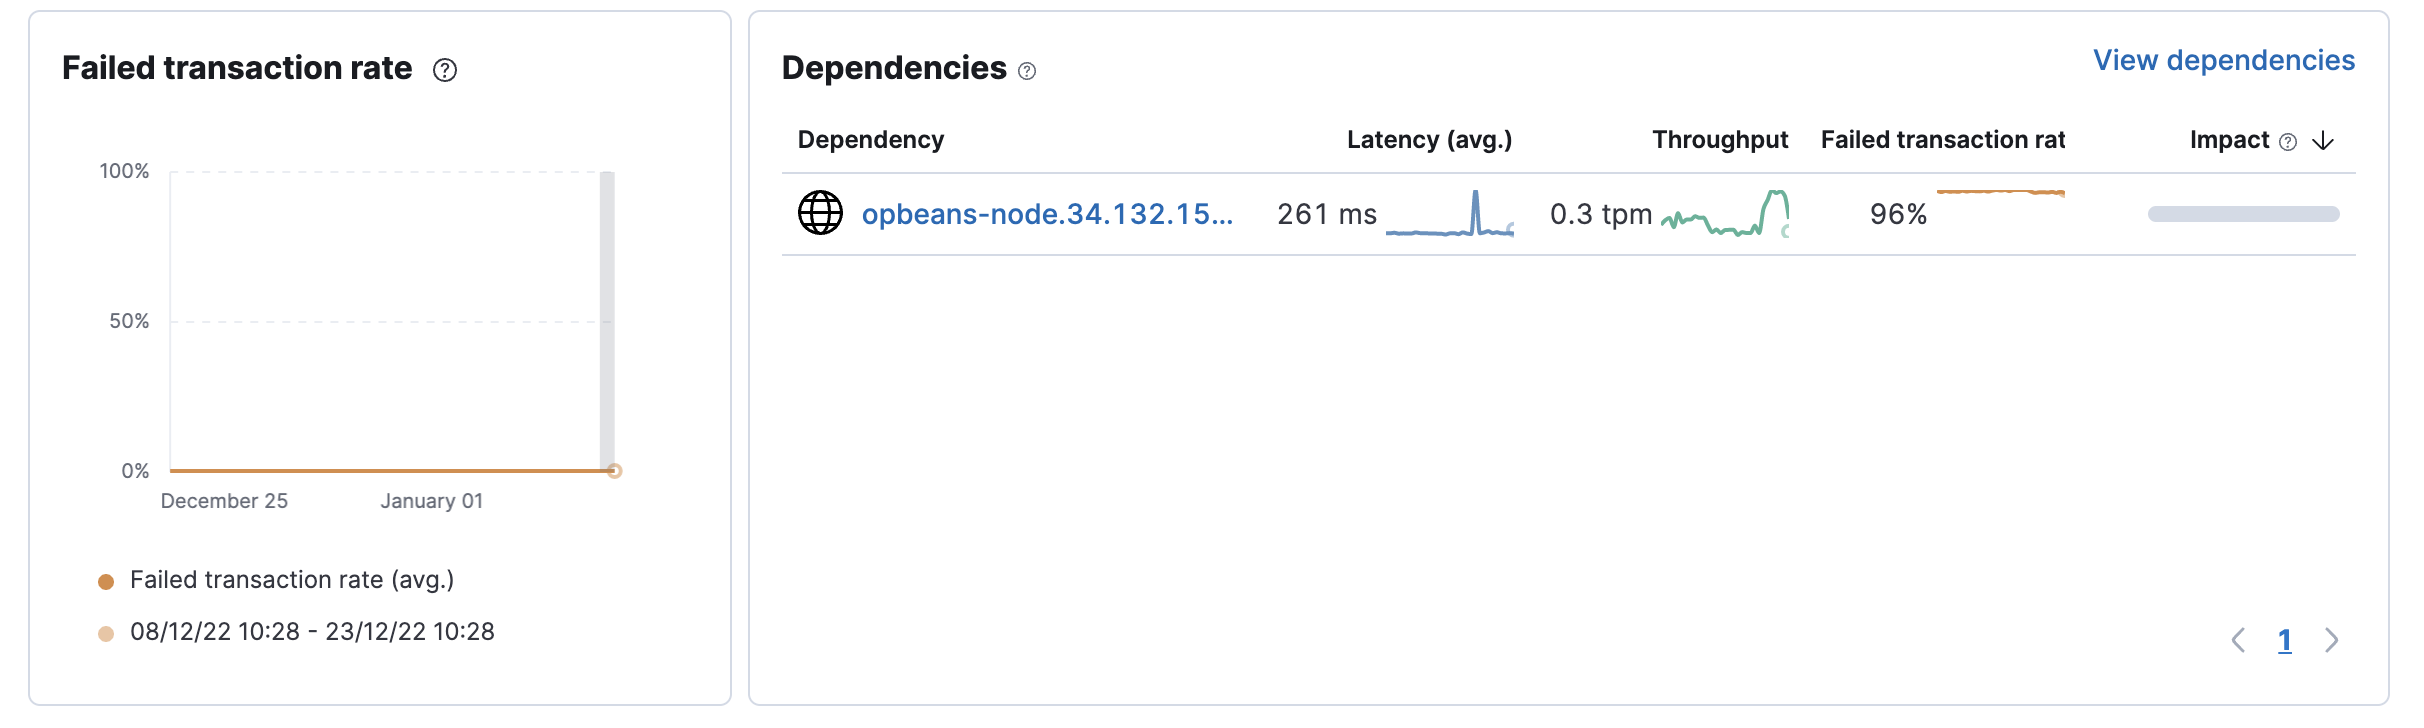 mobile service overview showing latency